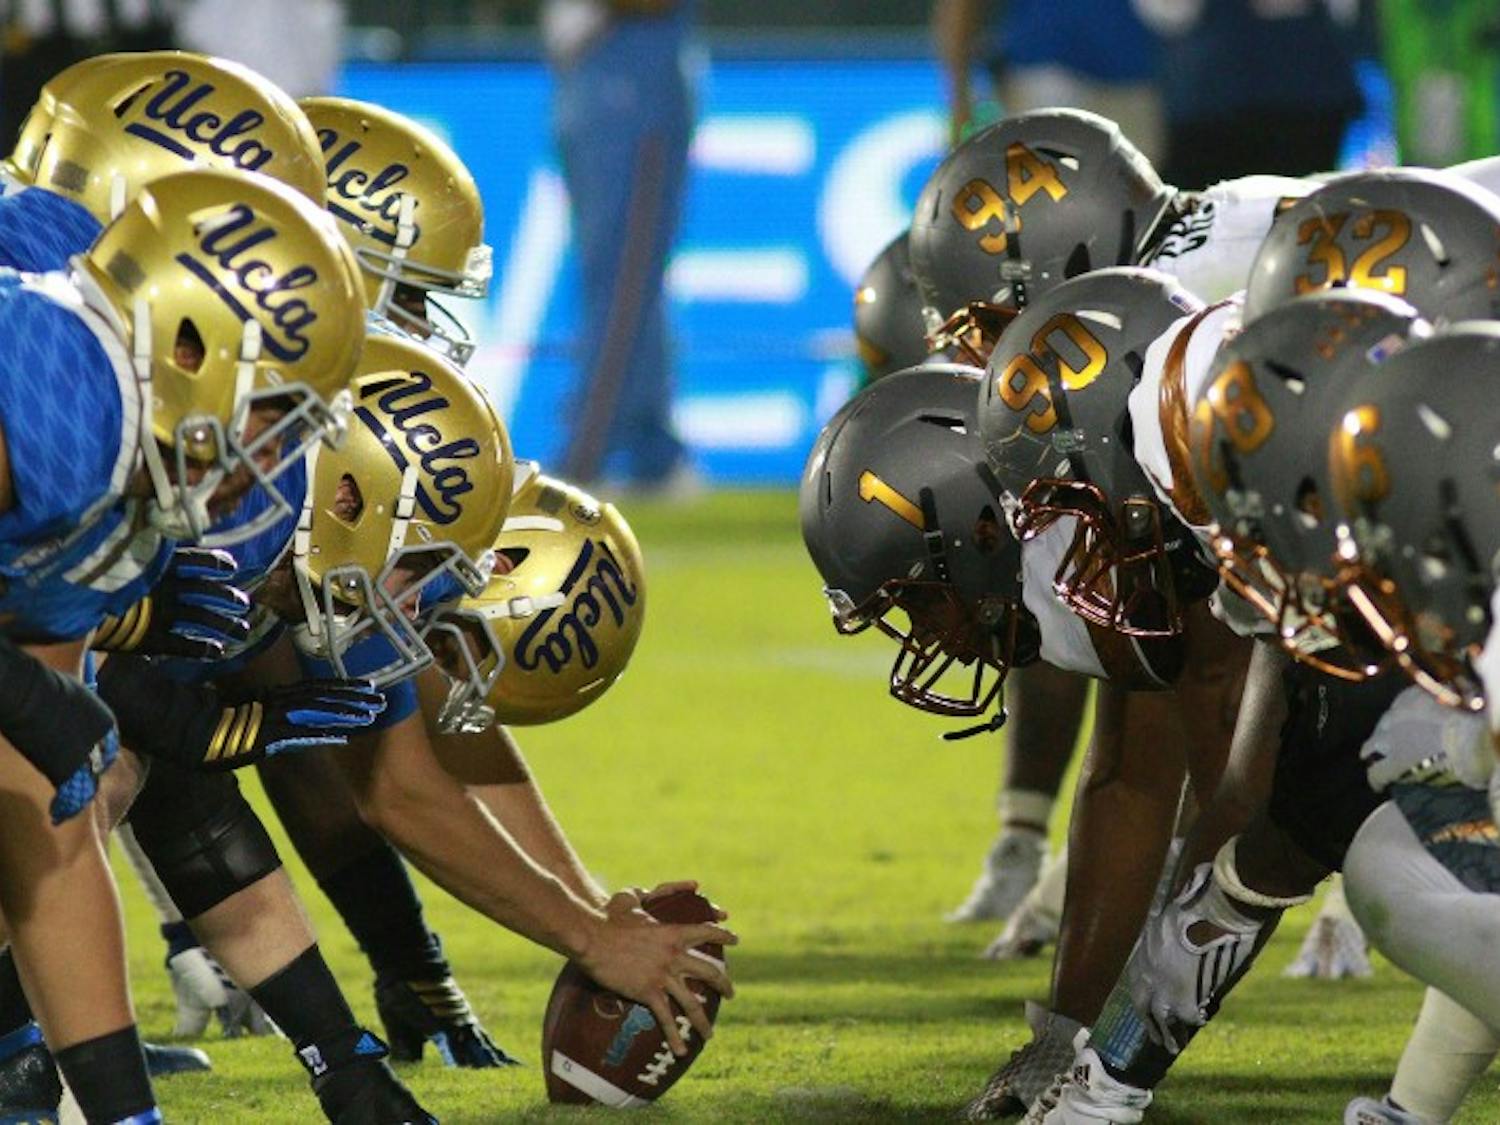 against UCLA on Saturday, Oct. 3, 2015, at Rose Bowl in Pasadena, California. The Sun Devils defeated the Bruins 38-23.